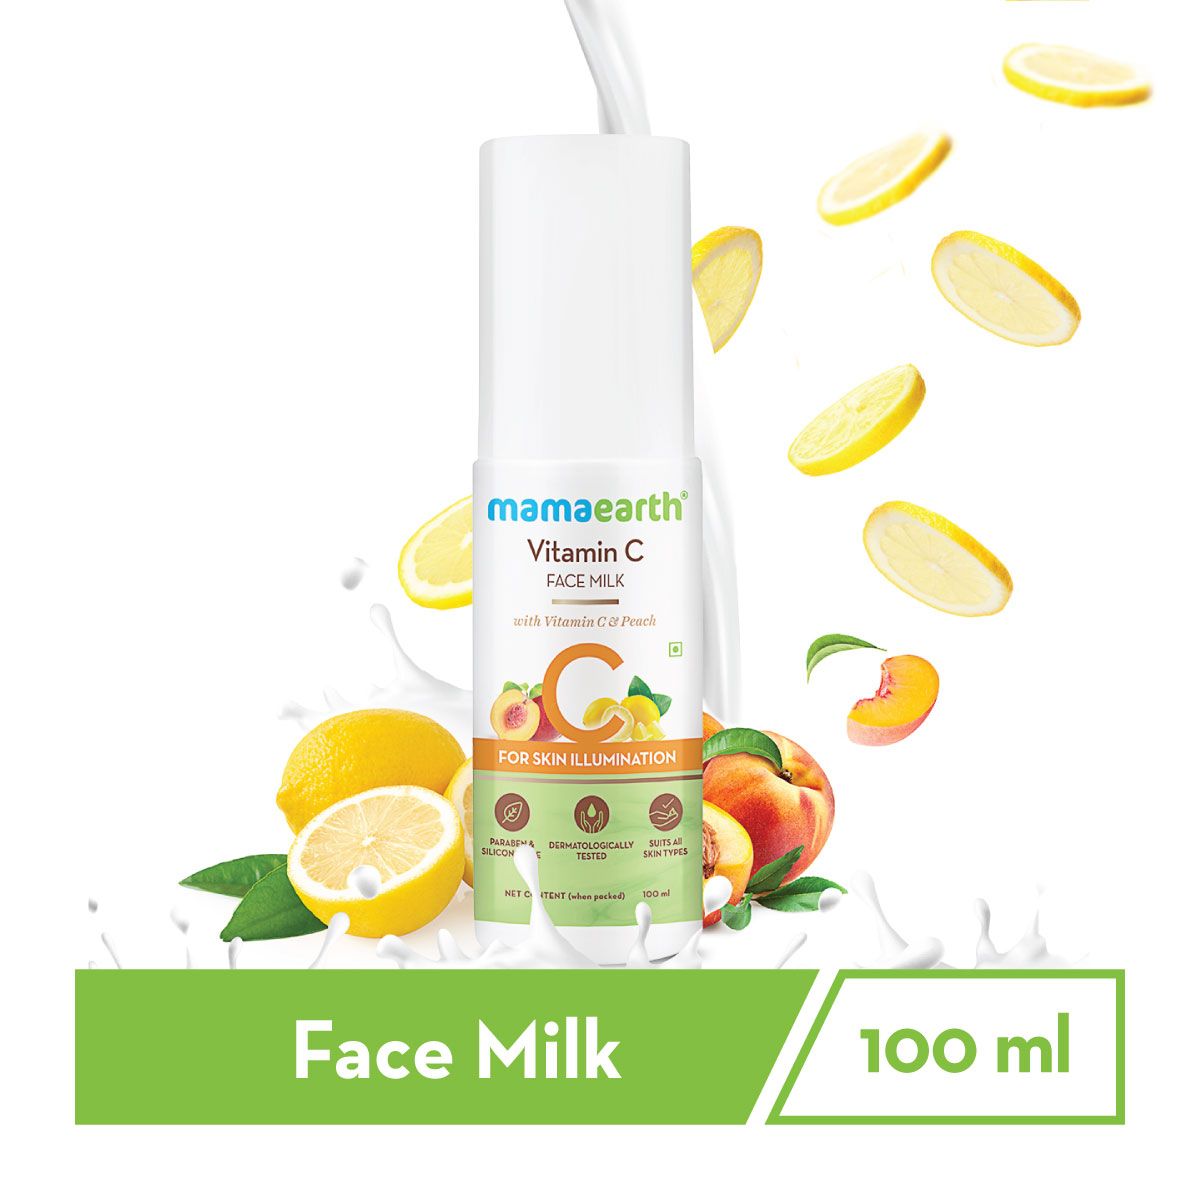 Mamaearth Vitamin C Face Milk Better Than Others Available In The Market